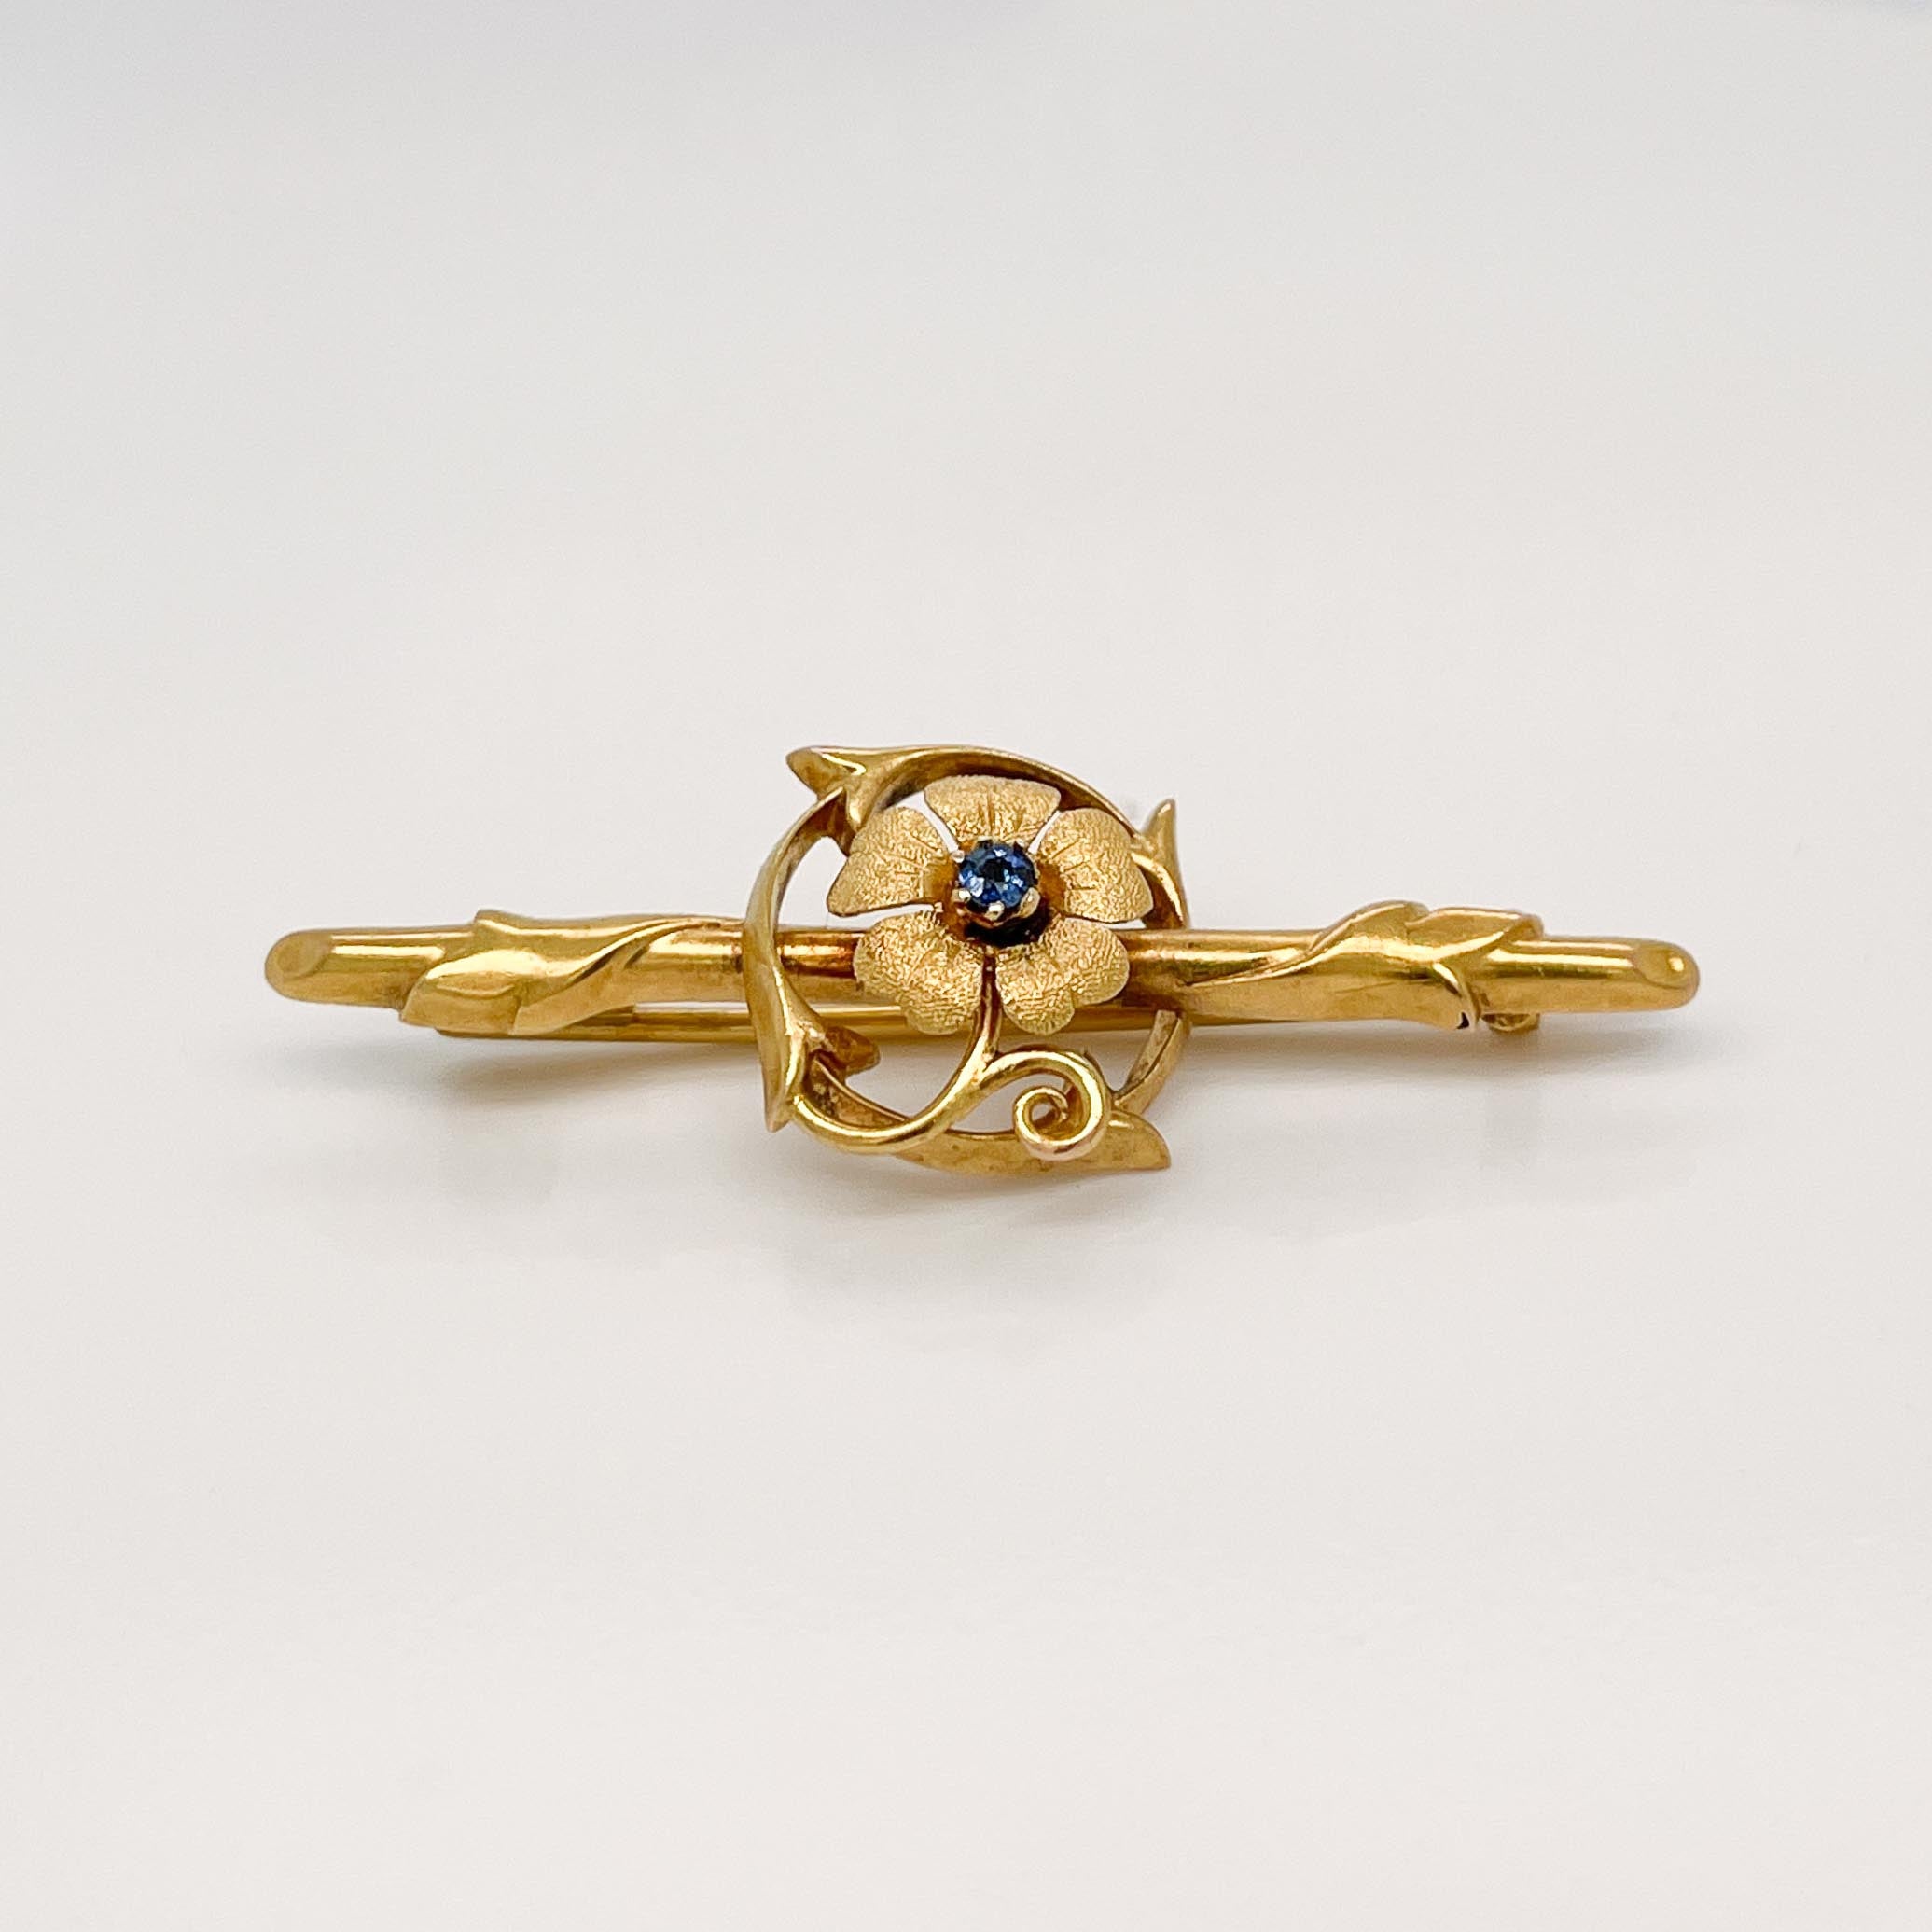 A fine antique Edwardian brooch.

In 15 karat yellow gold. 

In the form of a flower & vine set on a twig formed bar. The flower is set with a small round cut sapphire gemstone. 

Marked to the reverse for the maker F.B. and with English gold